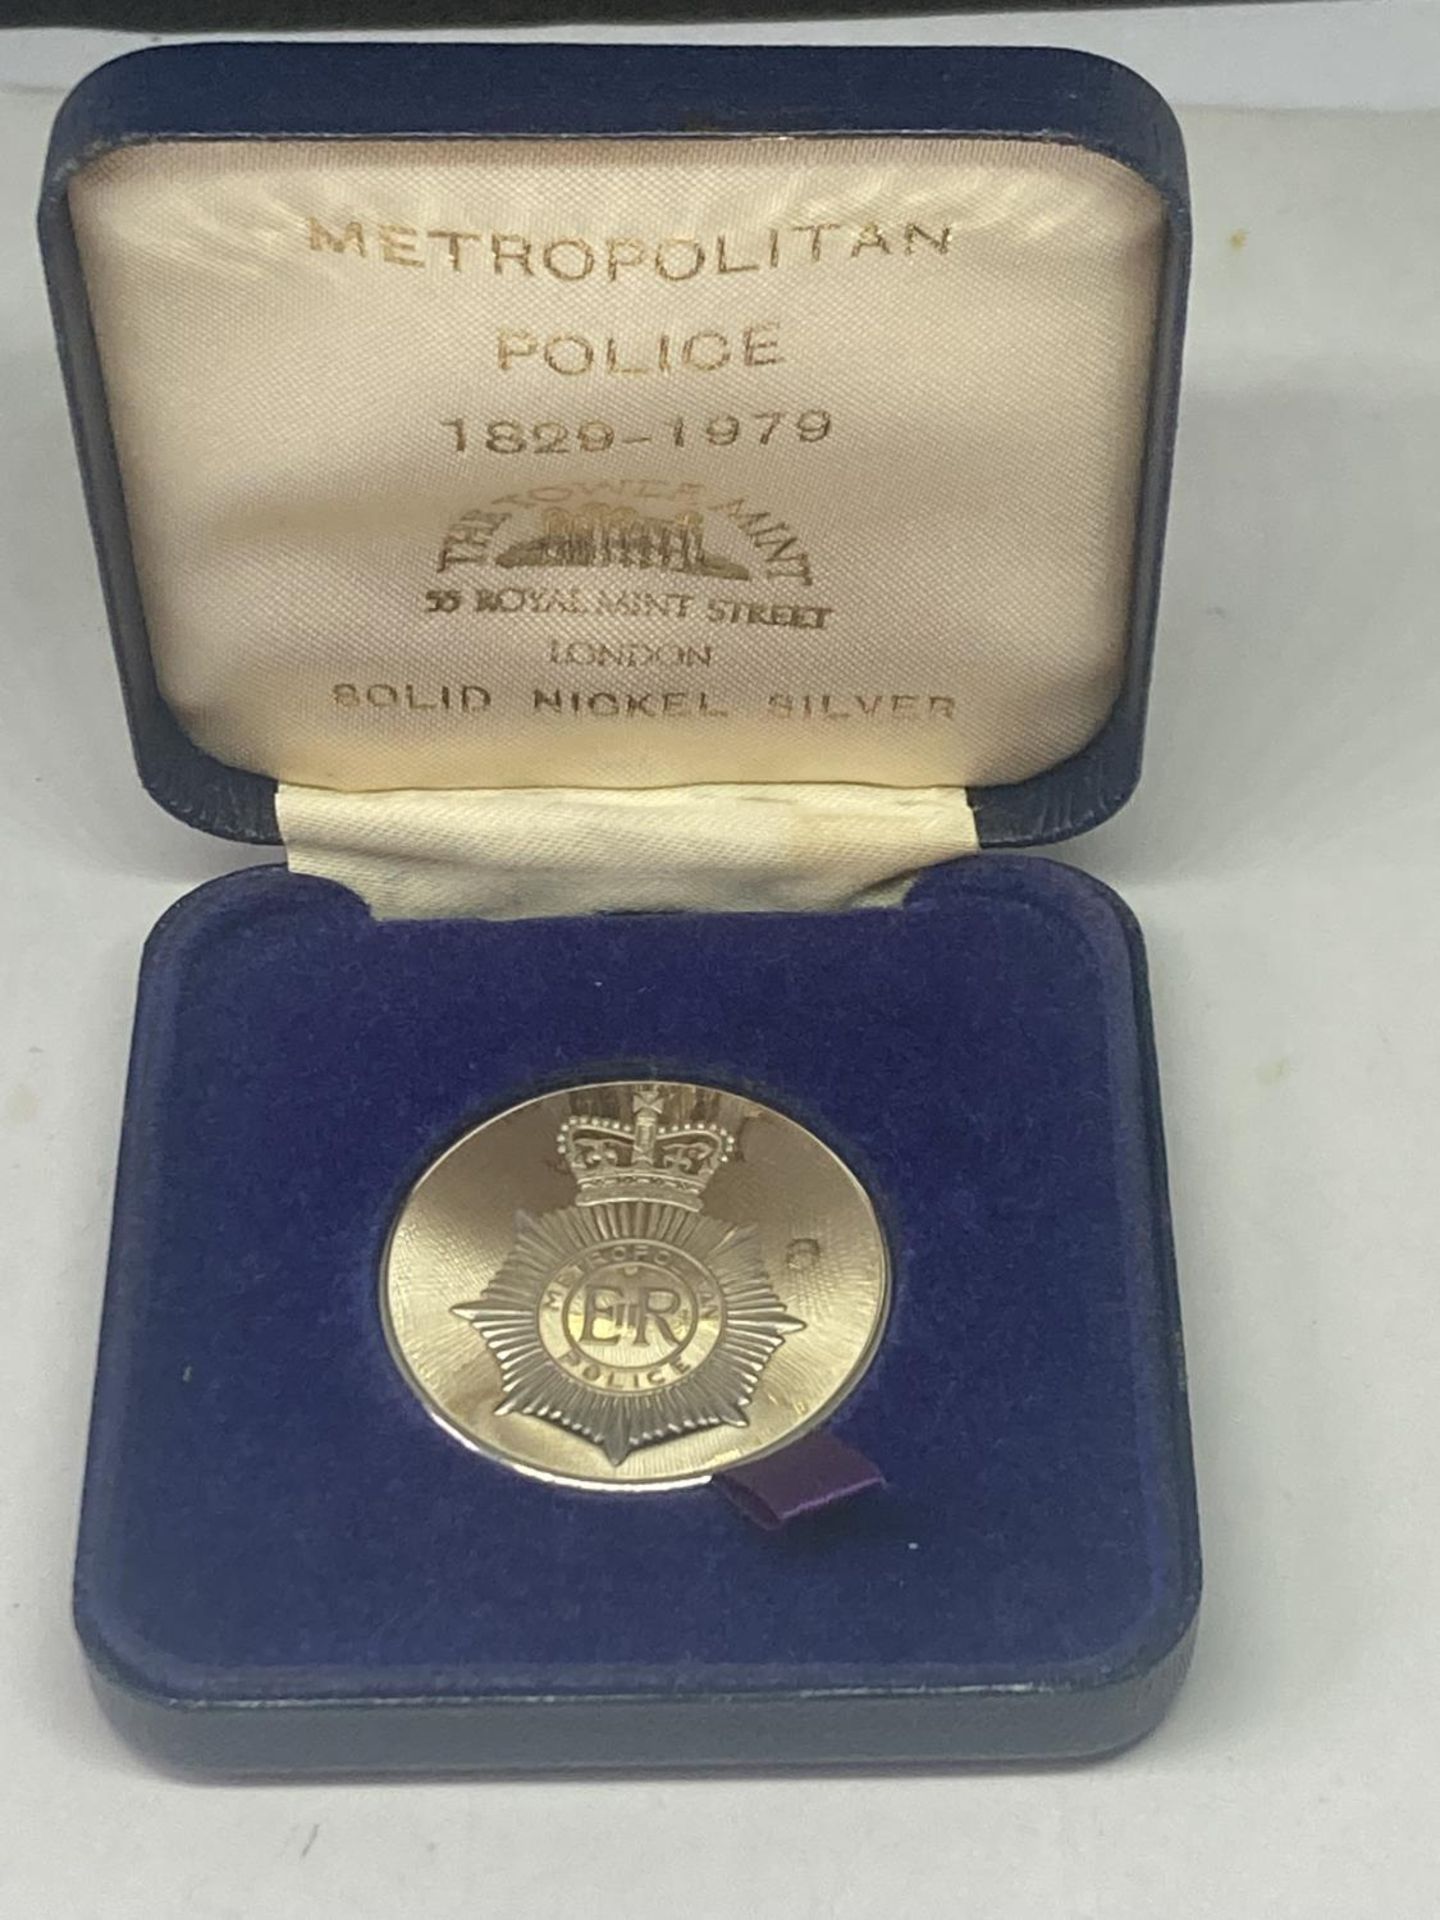 A SILVER TOWER MINT METROPOLITAN POLICE 150TH ANNIVERSARY MEDAL IN A PRESENTATION BOX